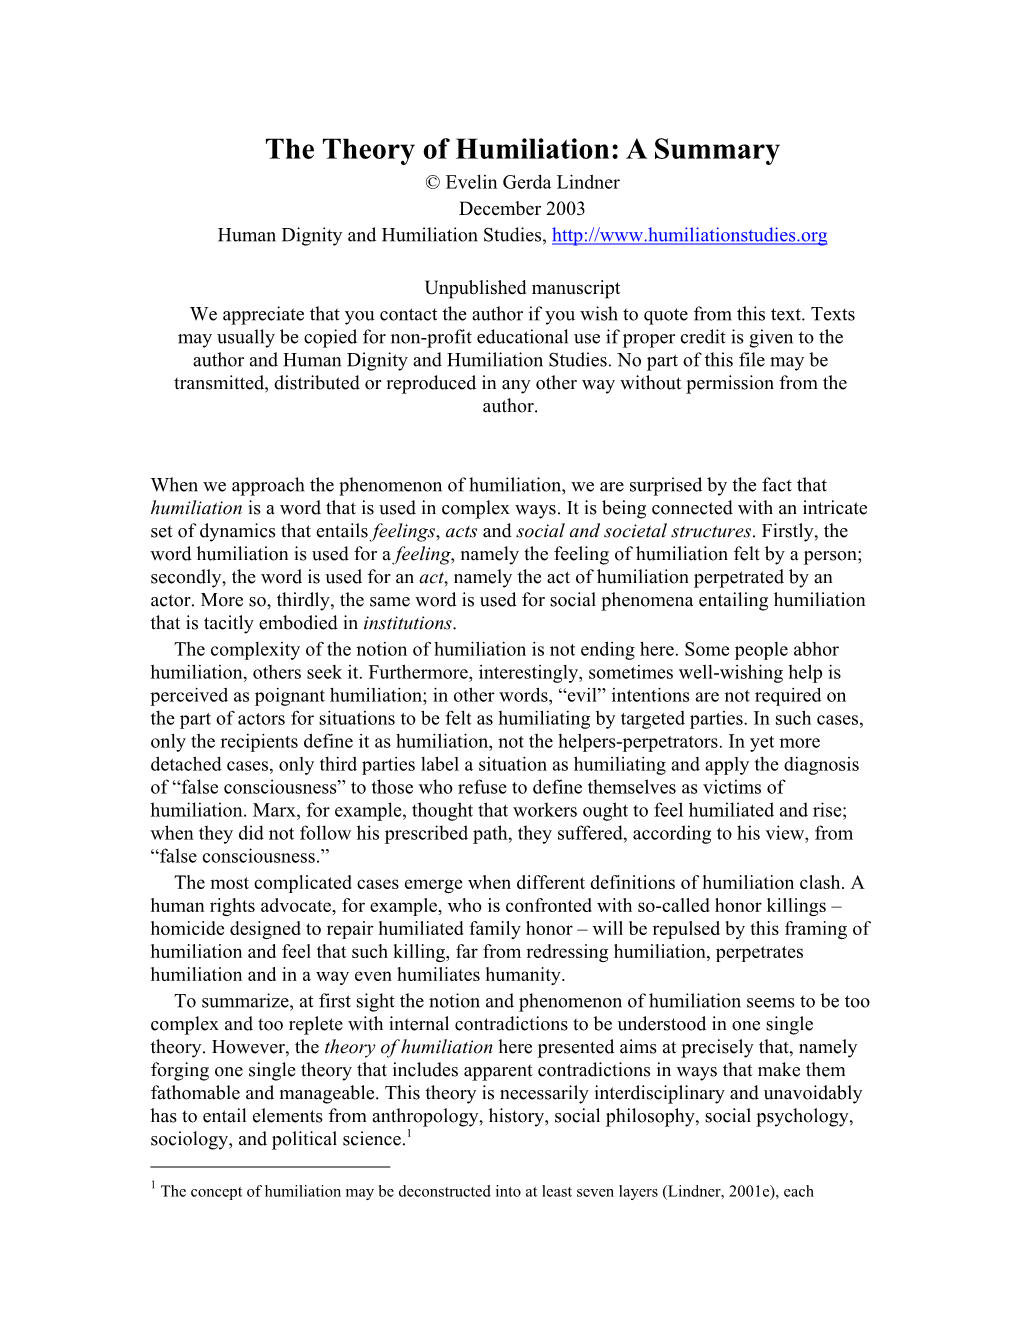 The Theory of Humiliation: a Summary © Evelin Gerda Lindner December 2003 Human Dignity and Humiliation Studies